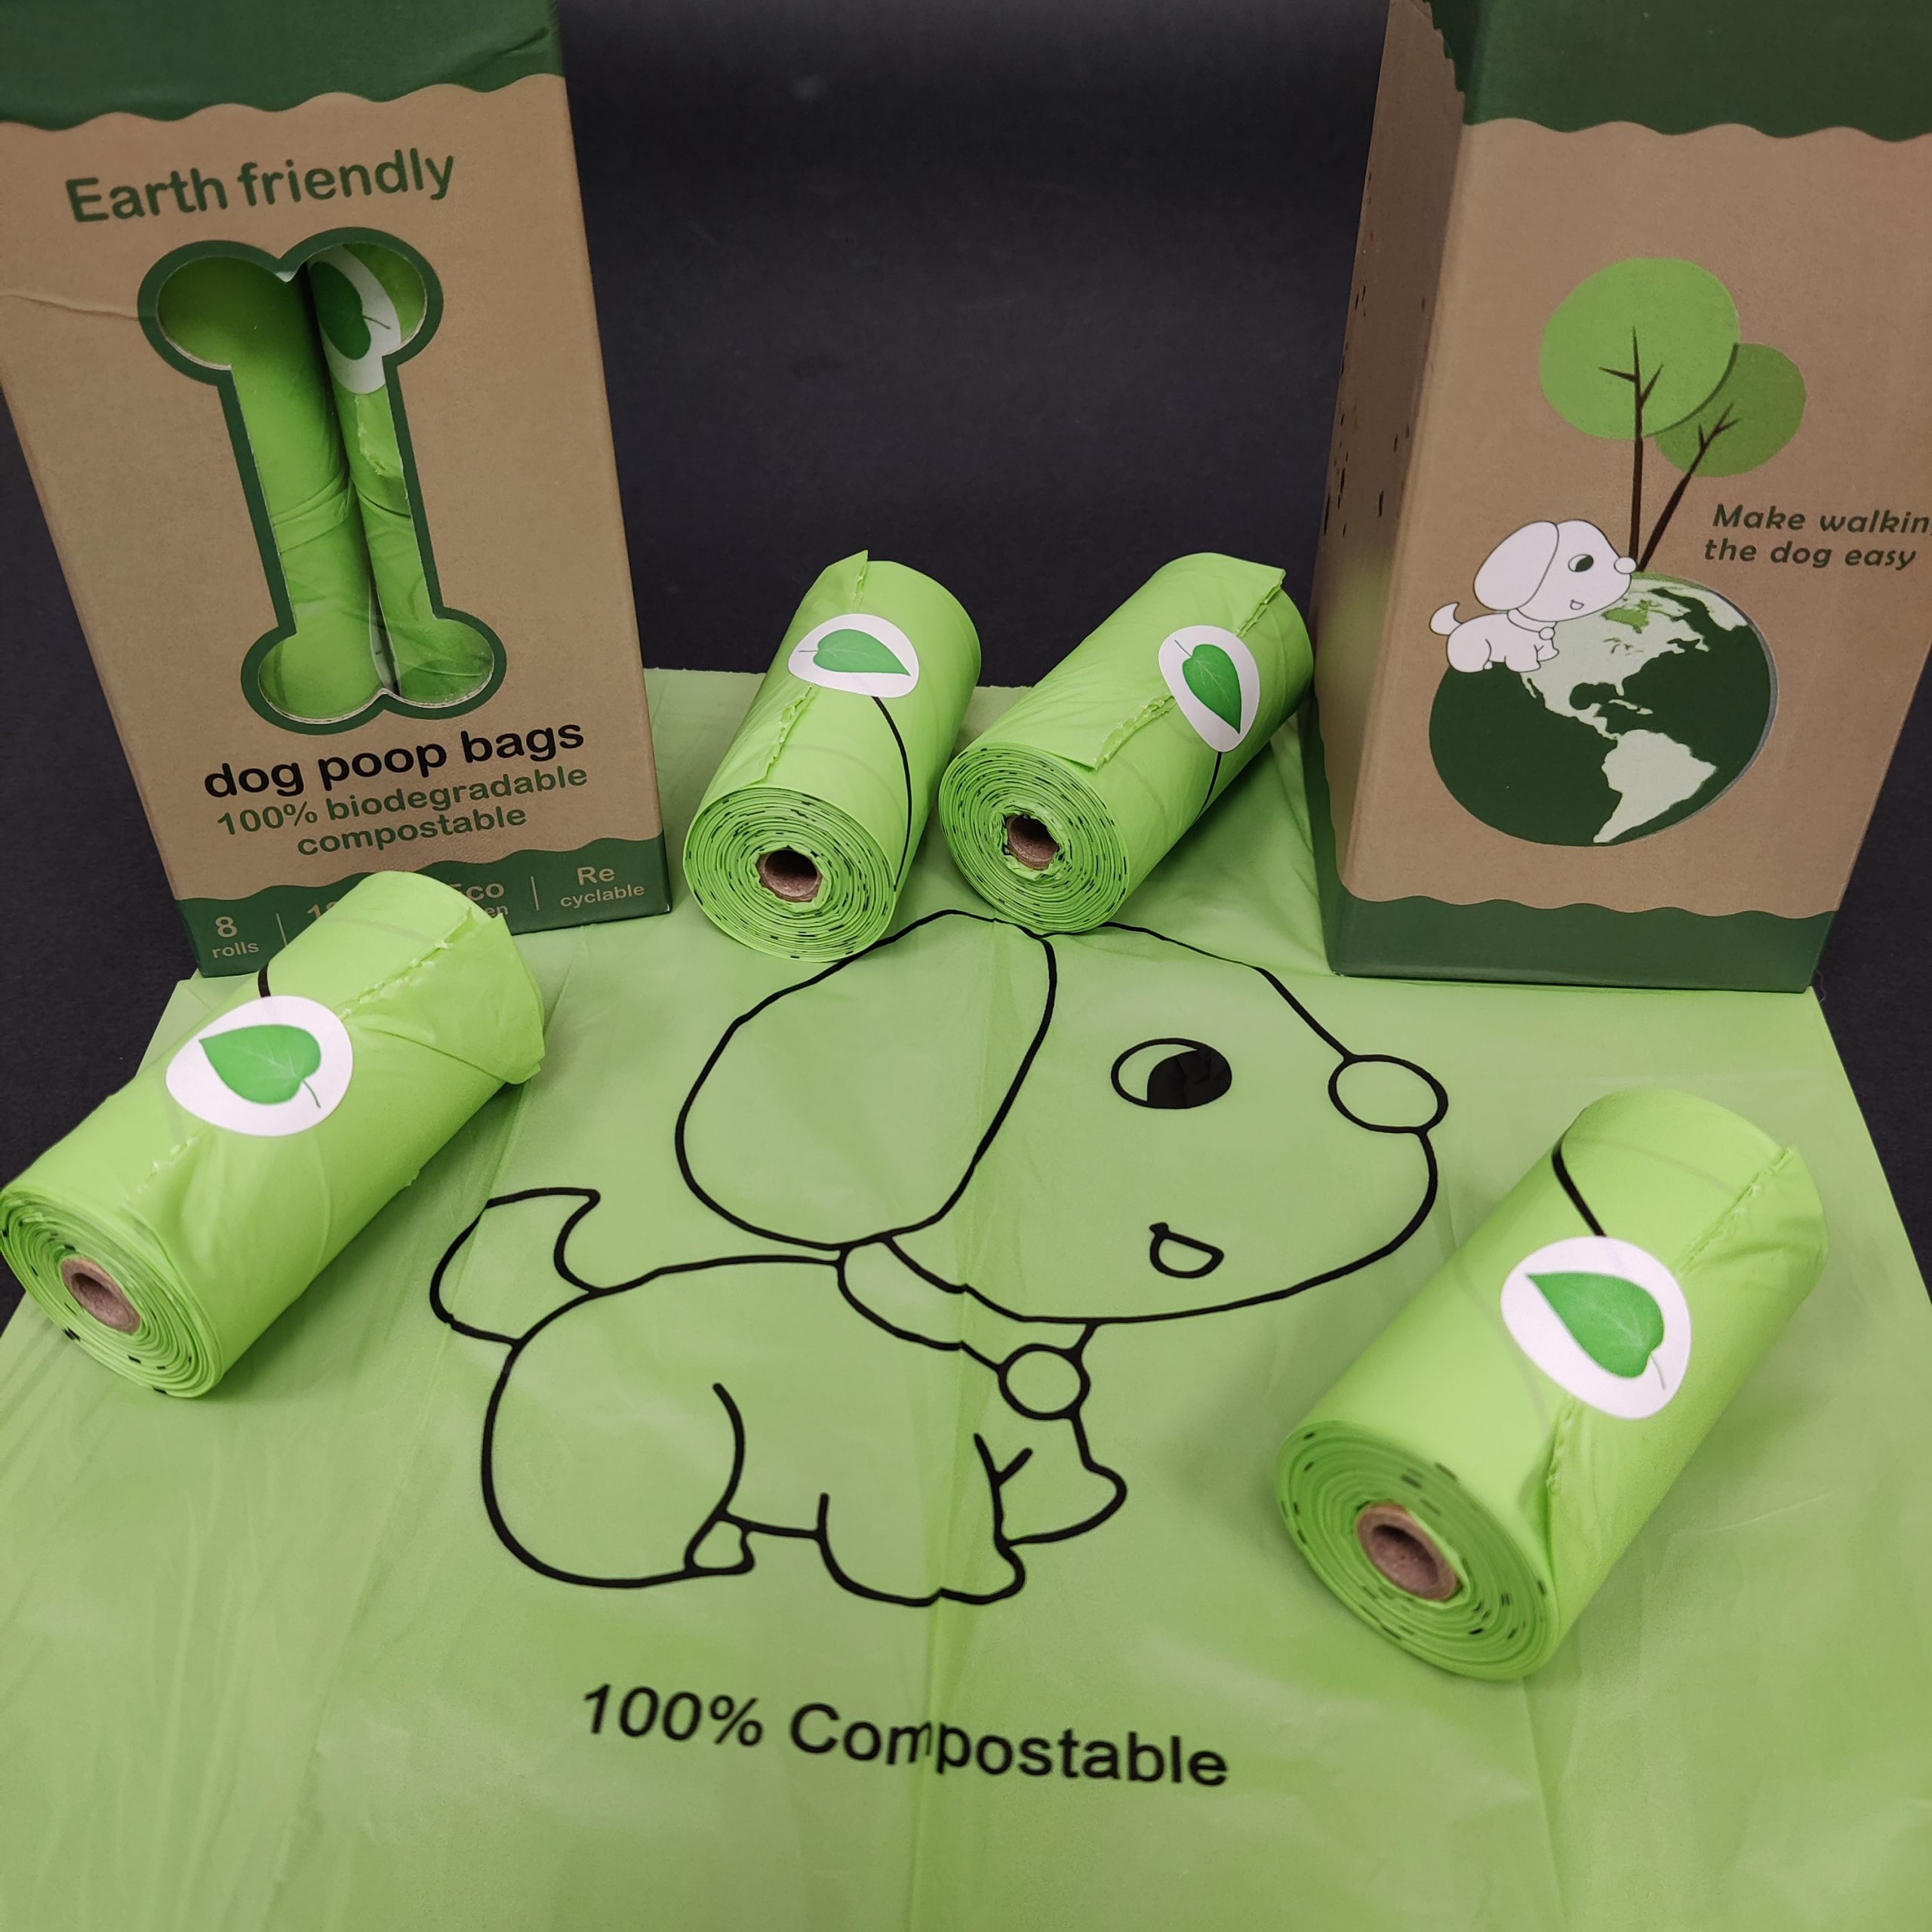 Dog A La Mode fully biodegradable and compostable eco friendly dog poop bags